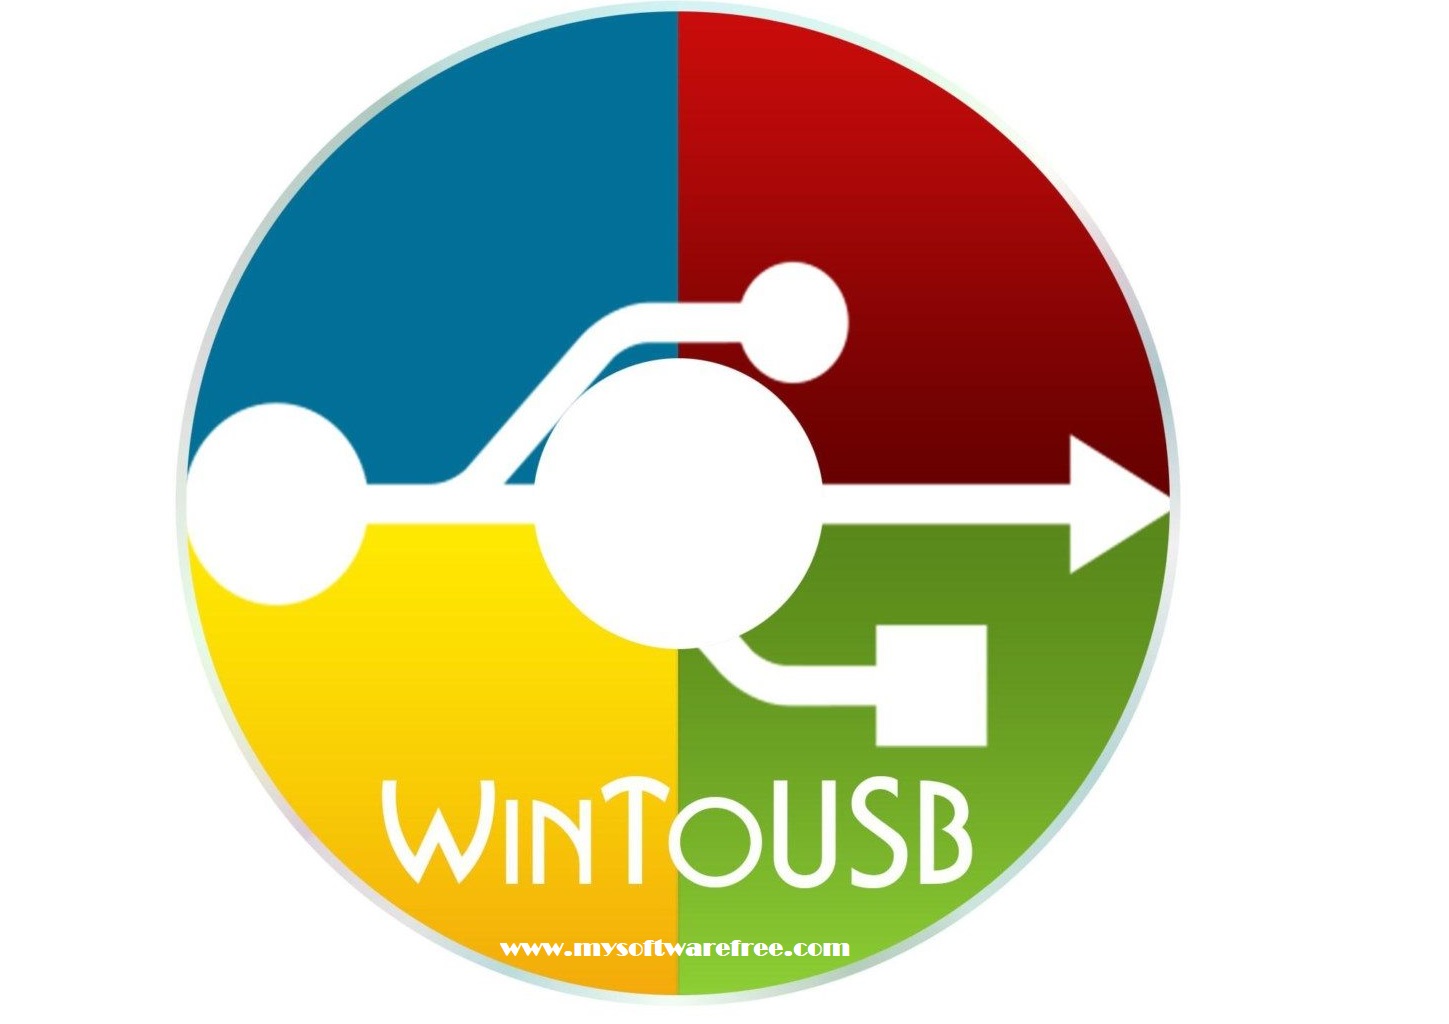 download the last version for iphoneWinToUSB 8.4